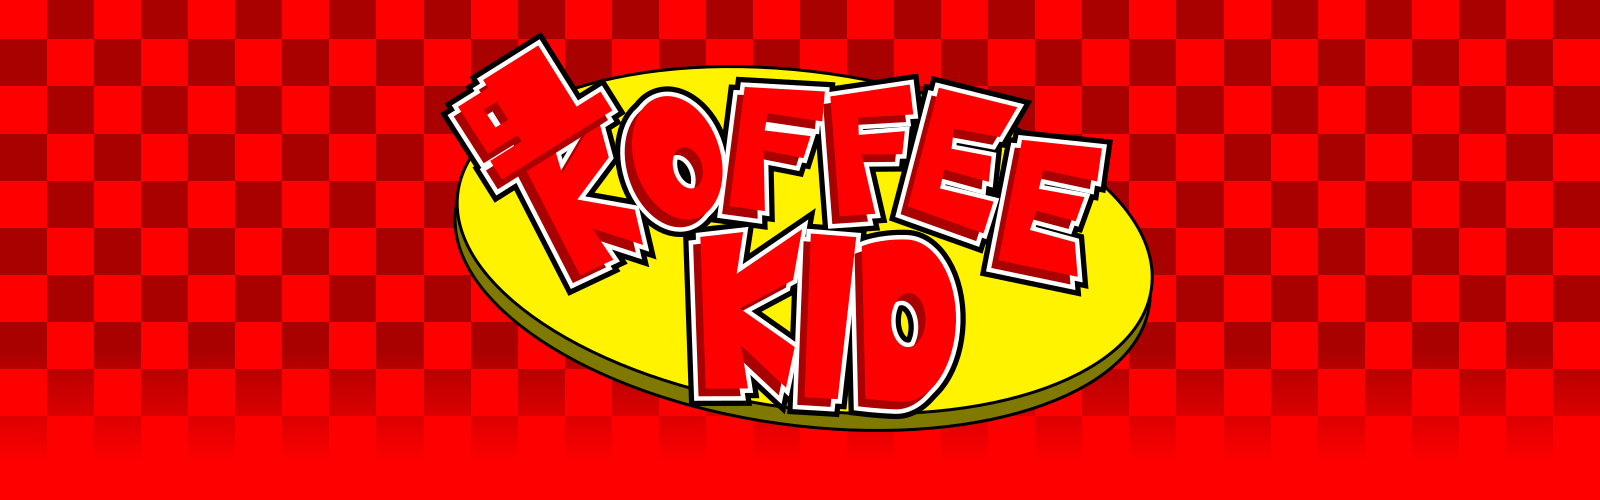 (OLD) Koffee Kid: The Game [DEMO]